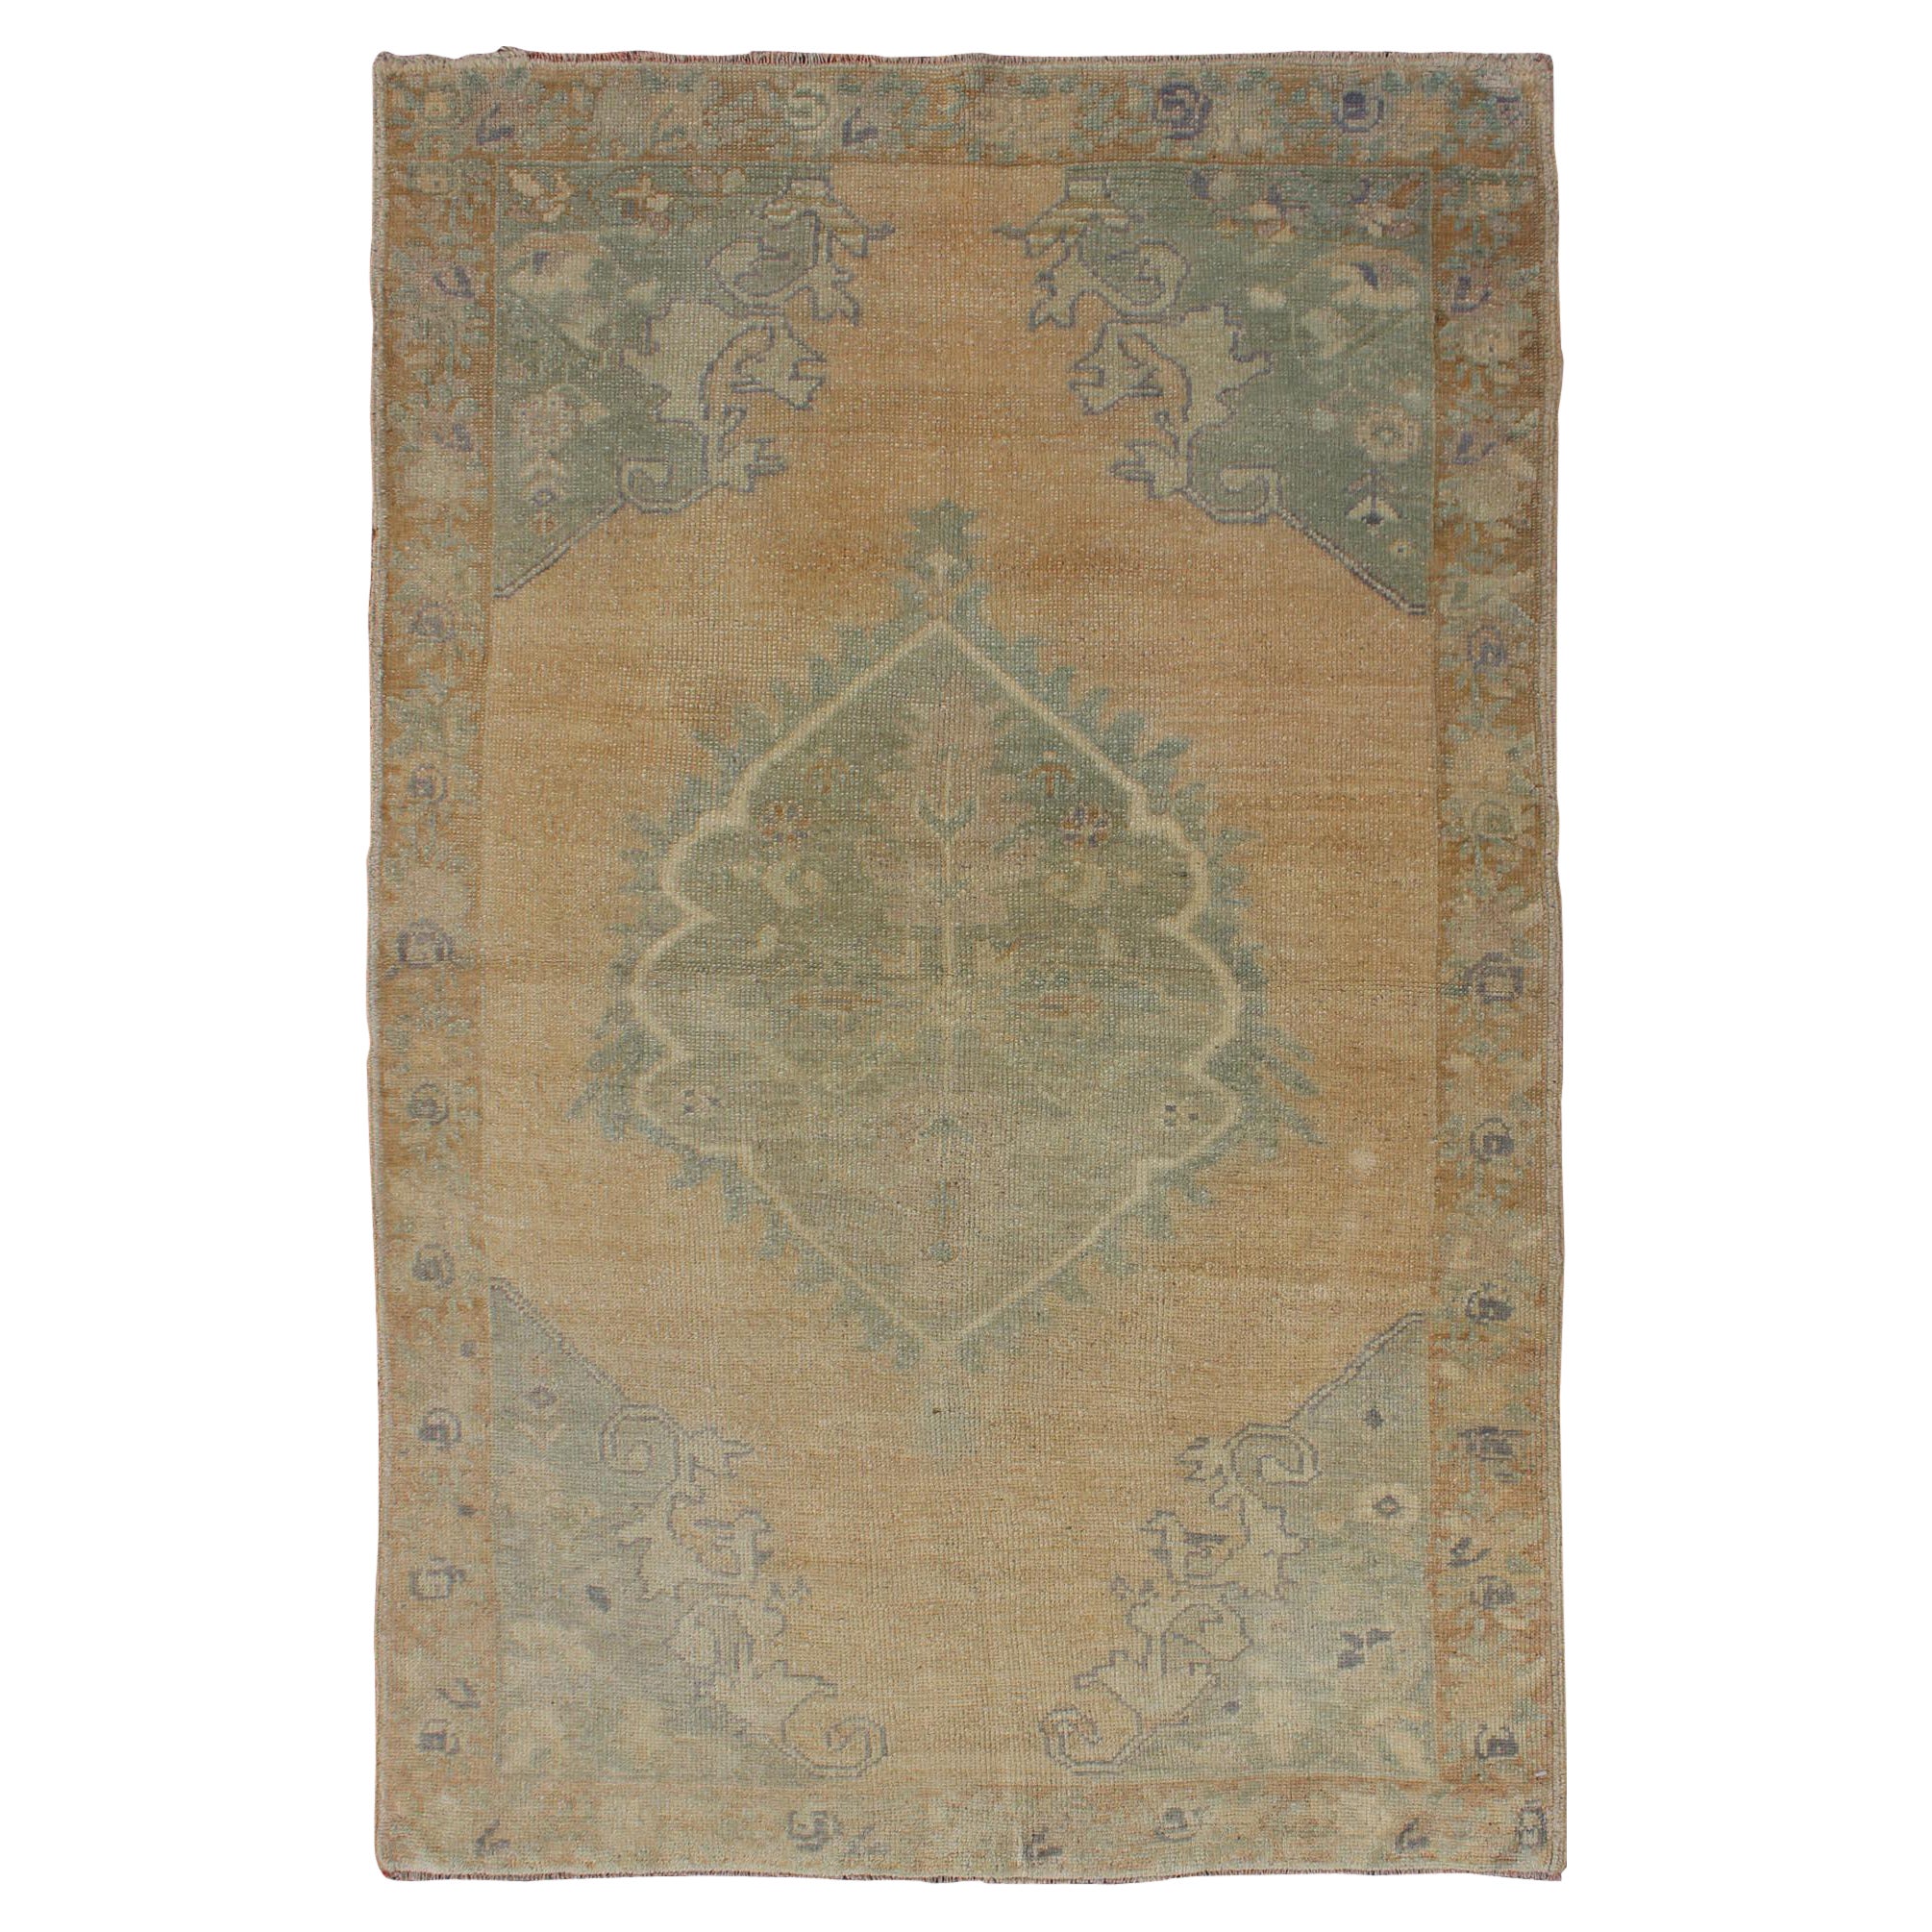 Vintage Oushak Rug from Turkey with Medallion Design in Green & Amber